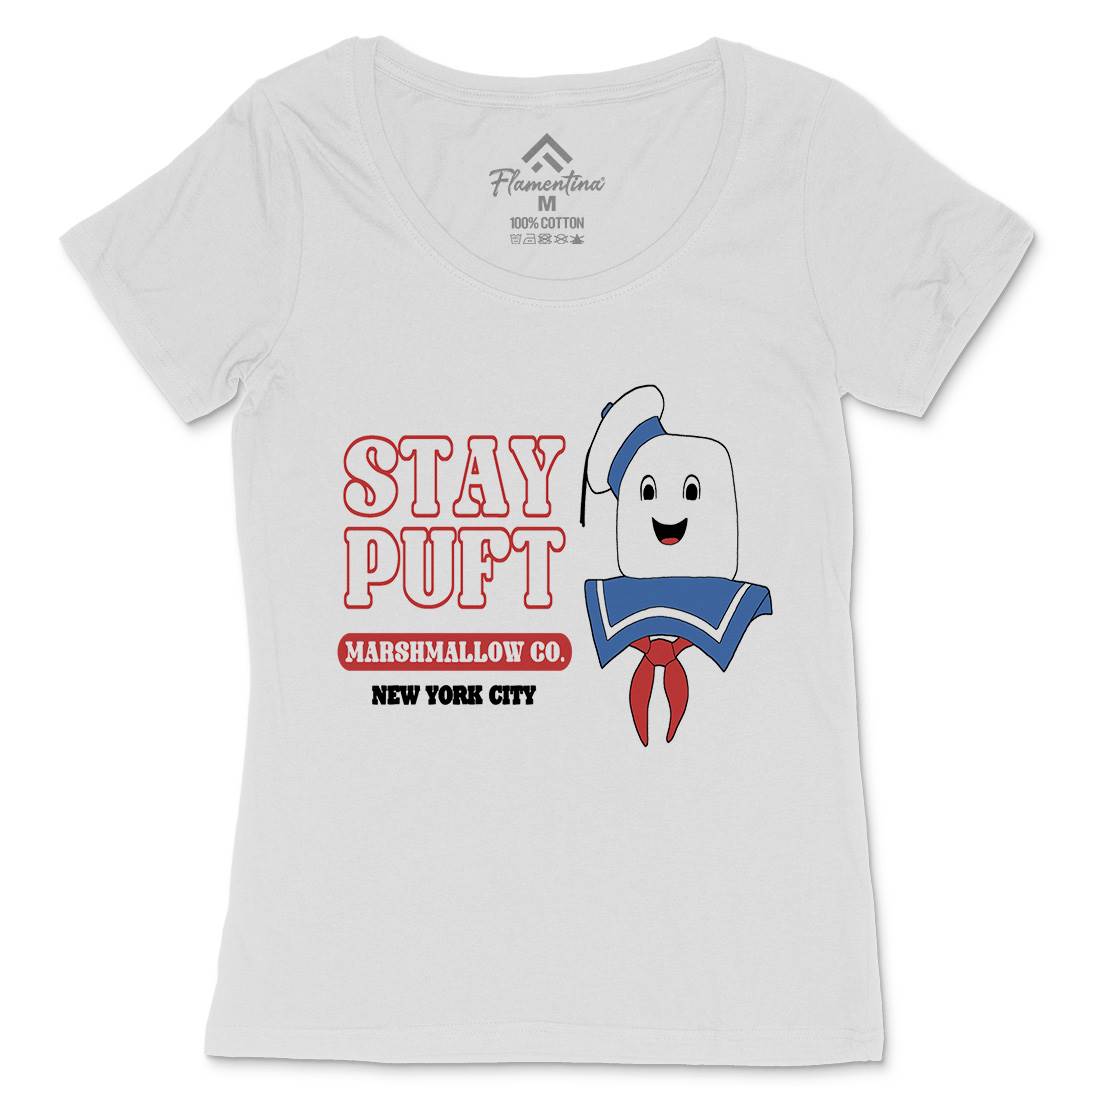 Stay Puft Co Womens Scoop Neck T-Shirt Space D141